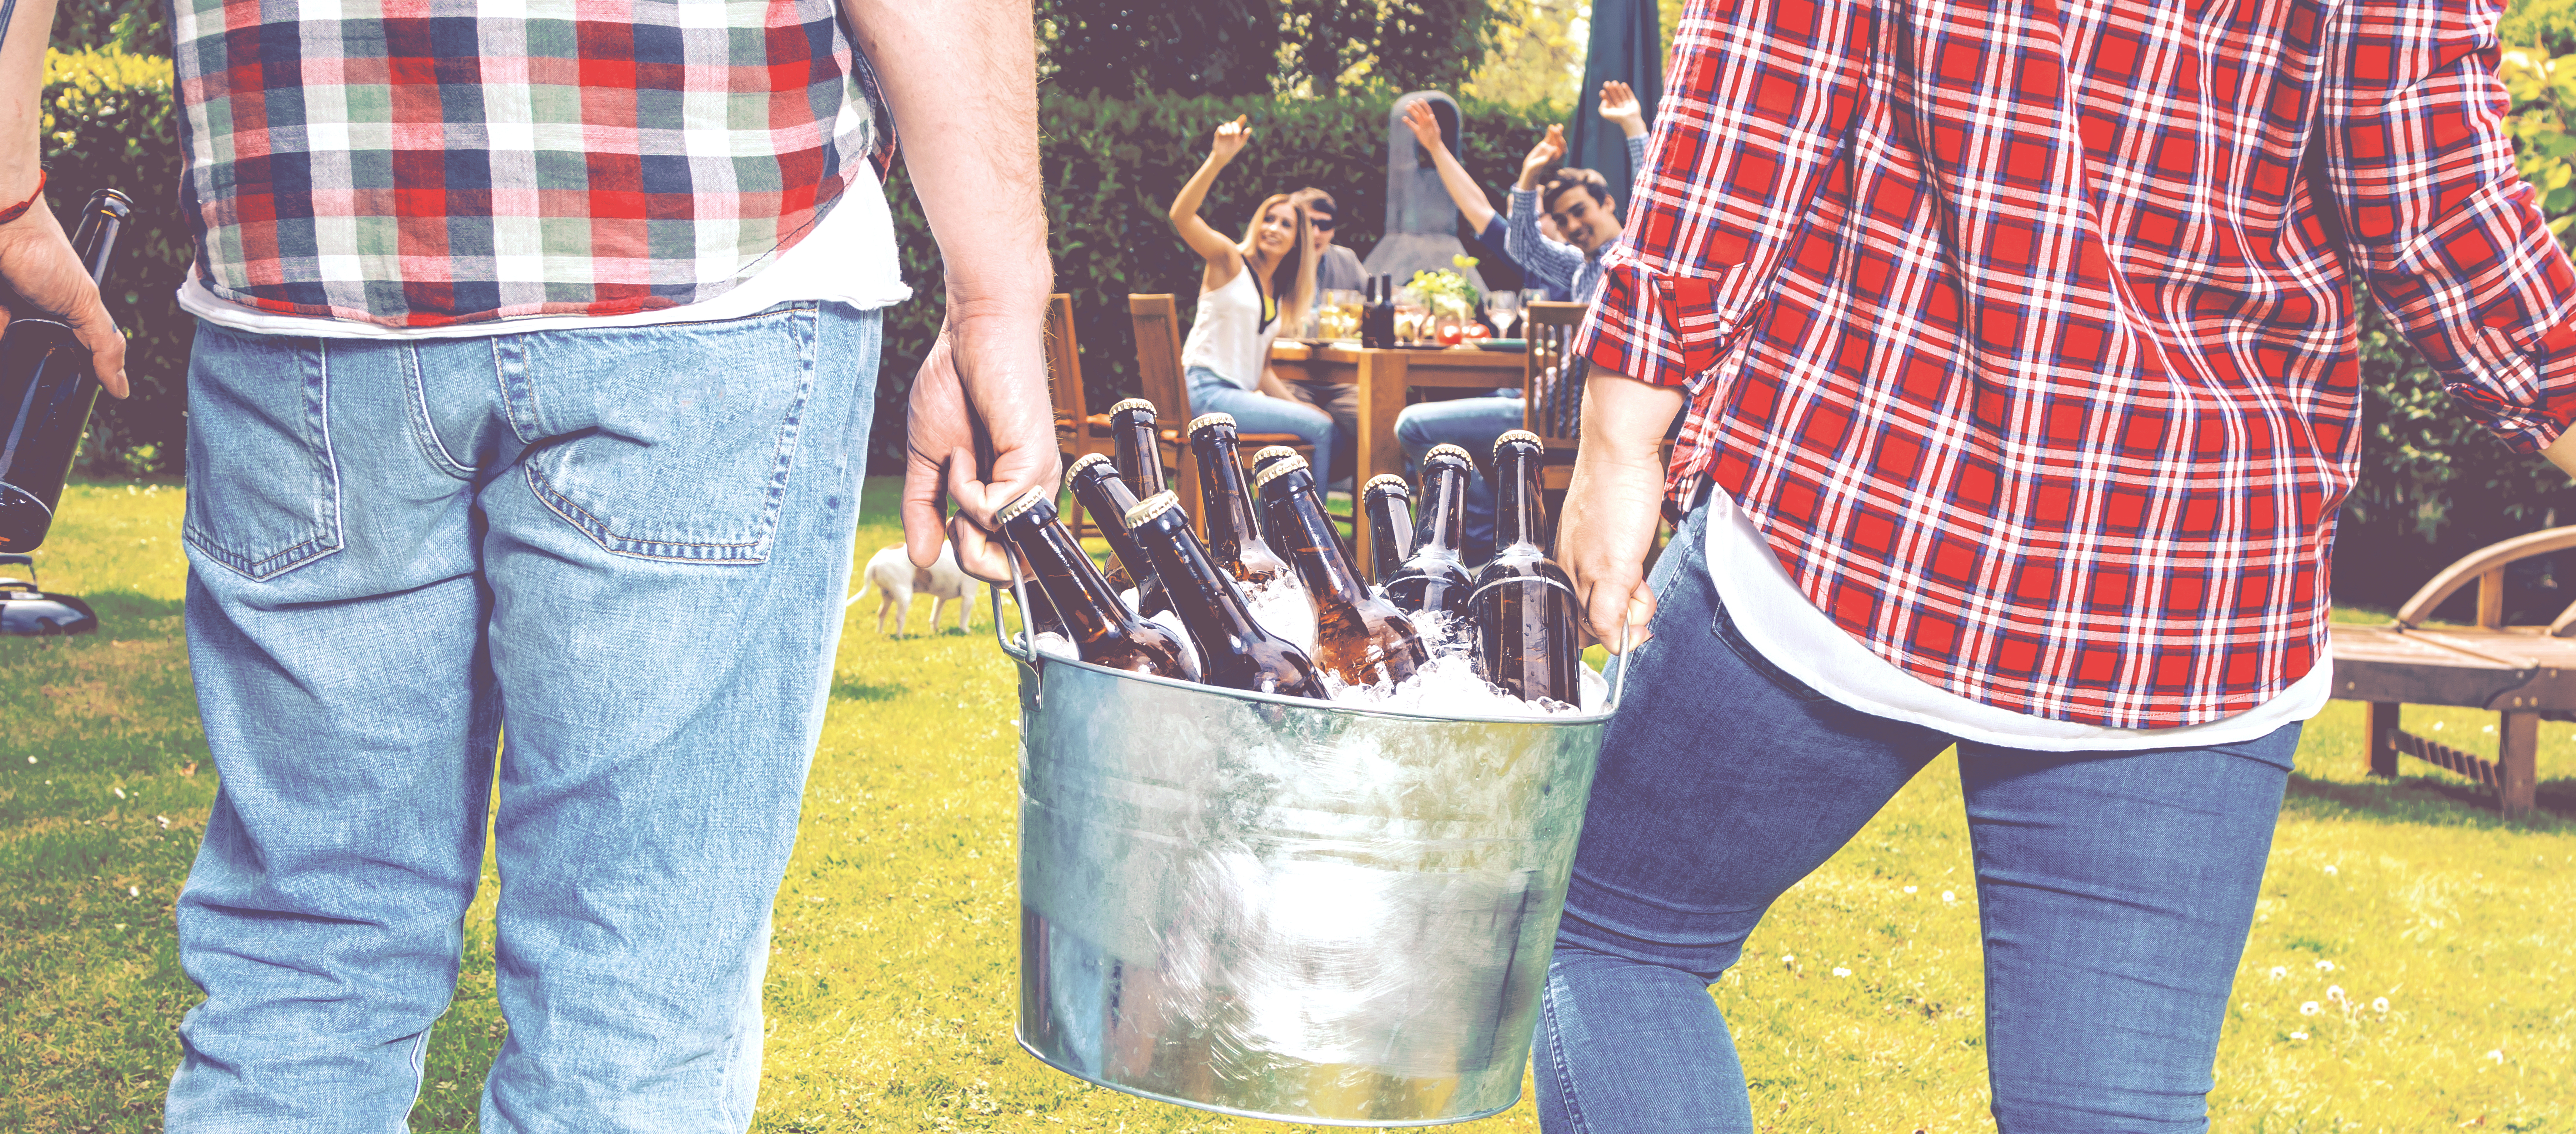 We have five tricks for keeping drinks cold at your next summer party